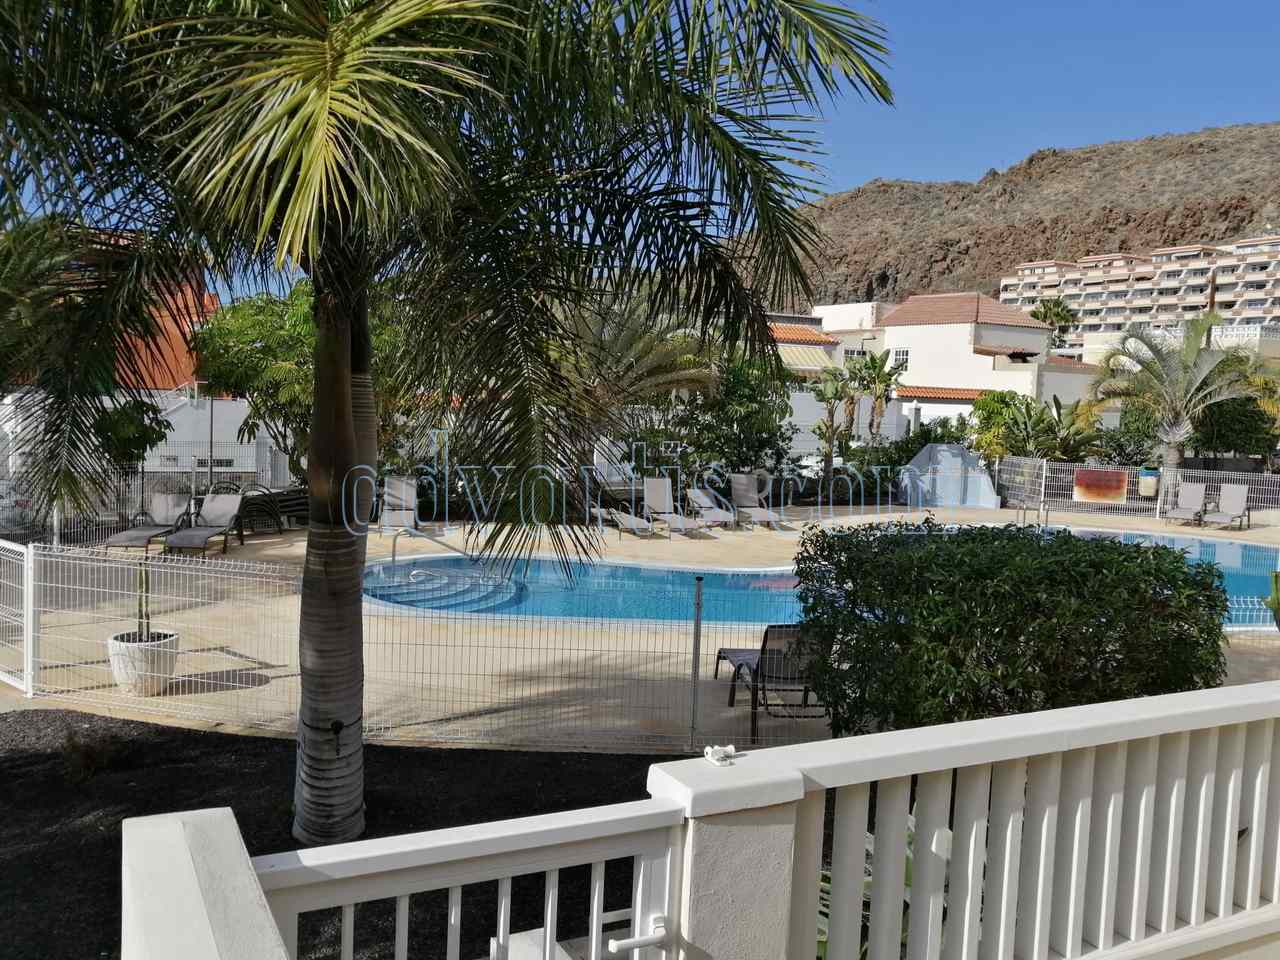 1 bedroom townhouse for sale in Palm-Mar, Tenerife €225.000